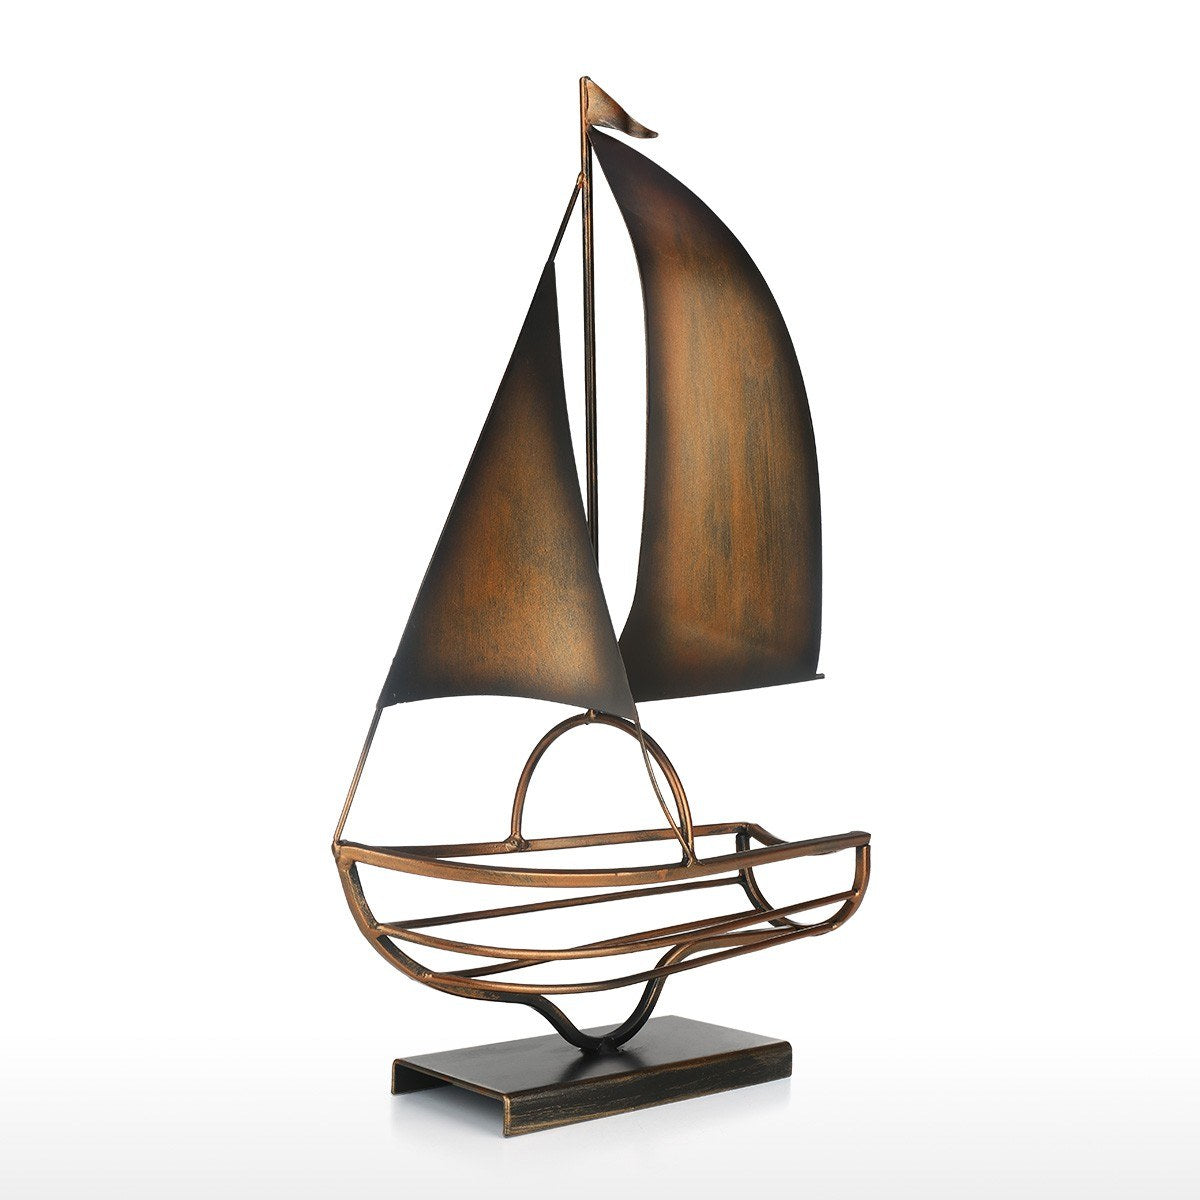 A boat turns into a great and decorative single wine bottle holder!